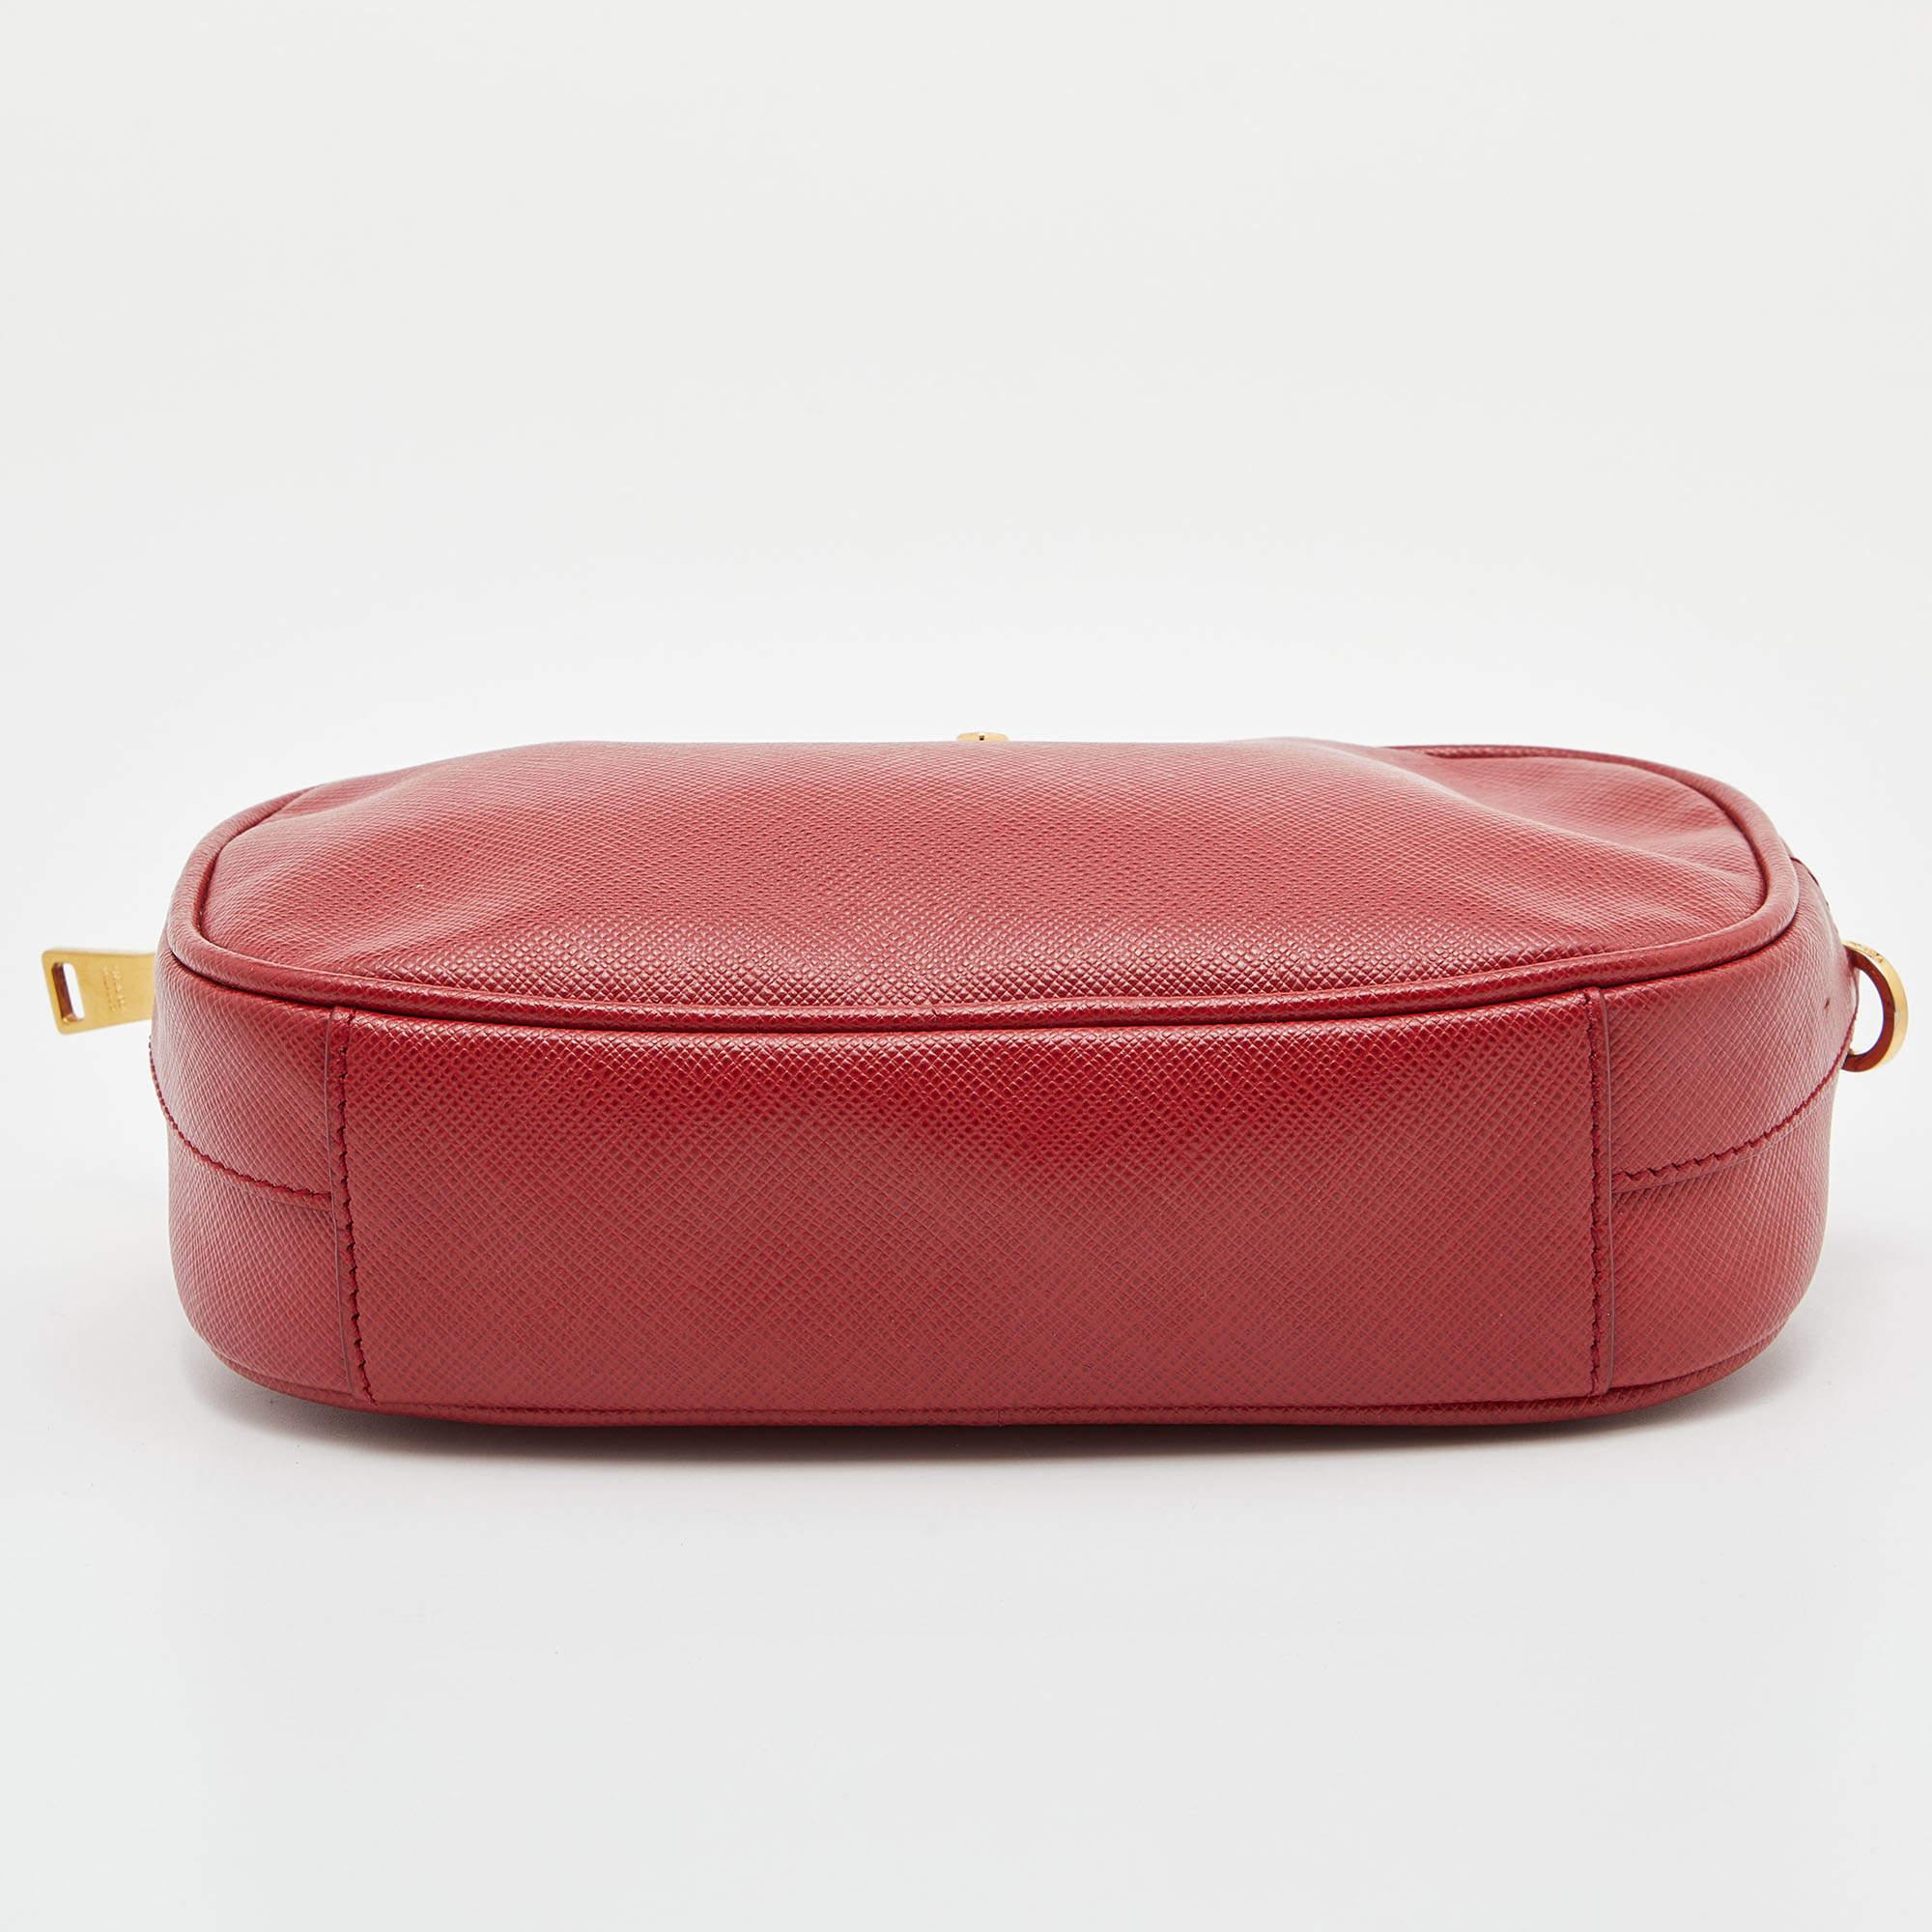 Prada Red Saffiano Lux Leather Convertible Chain Belt Bag 1